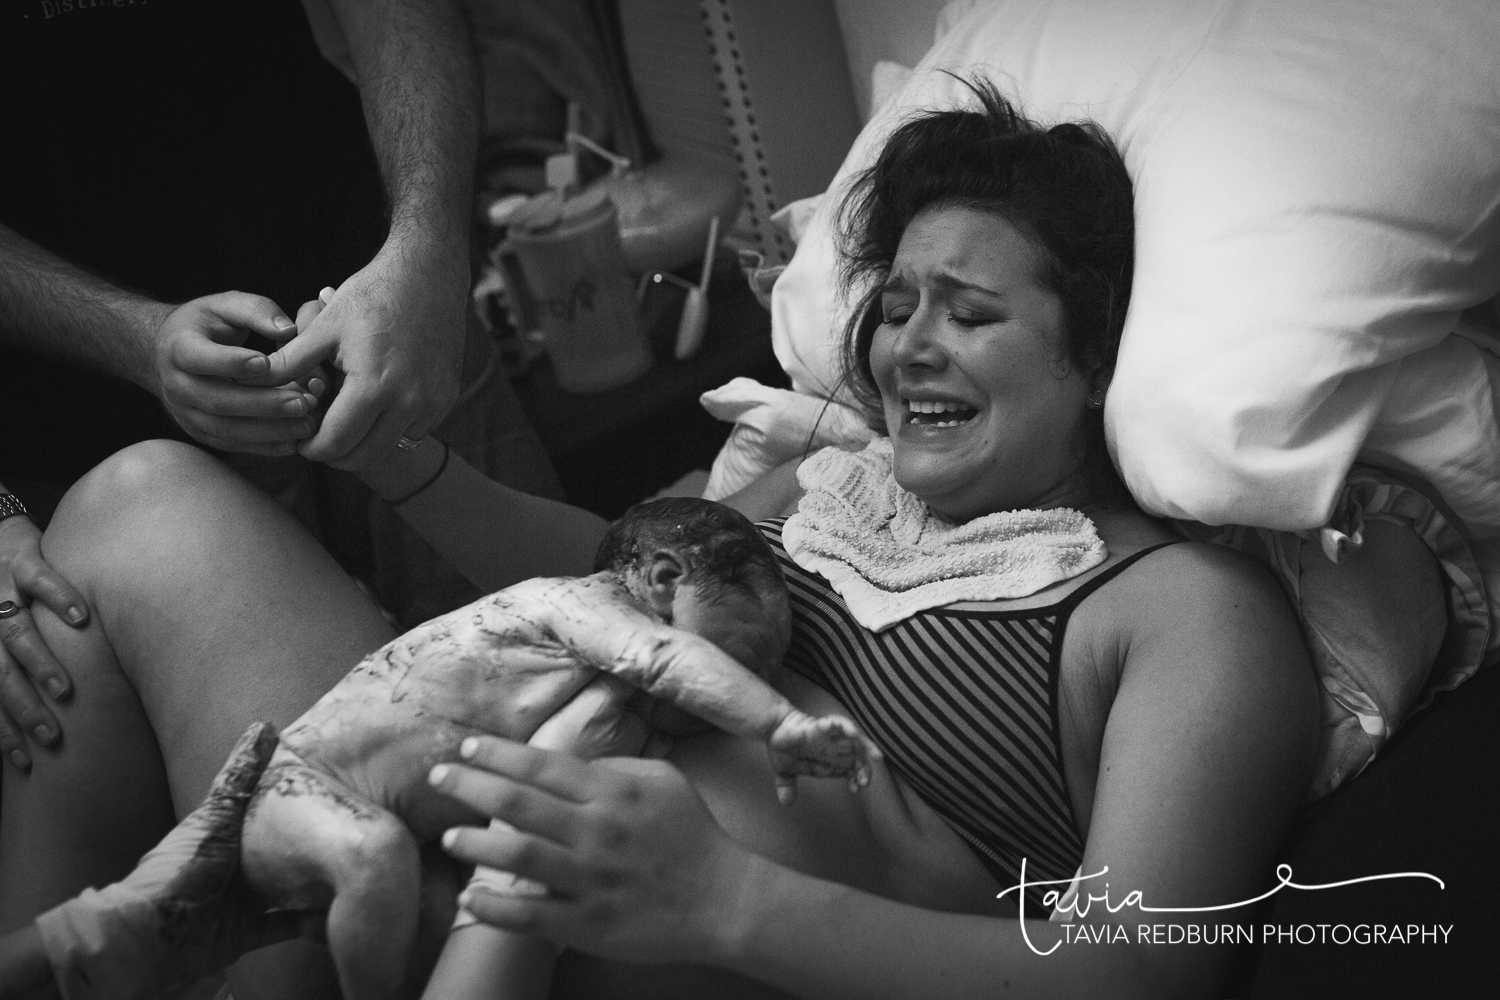 how to capture the I did it moment in birth photography